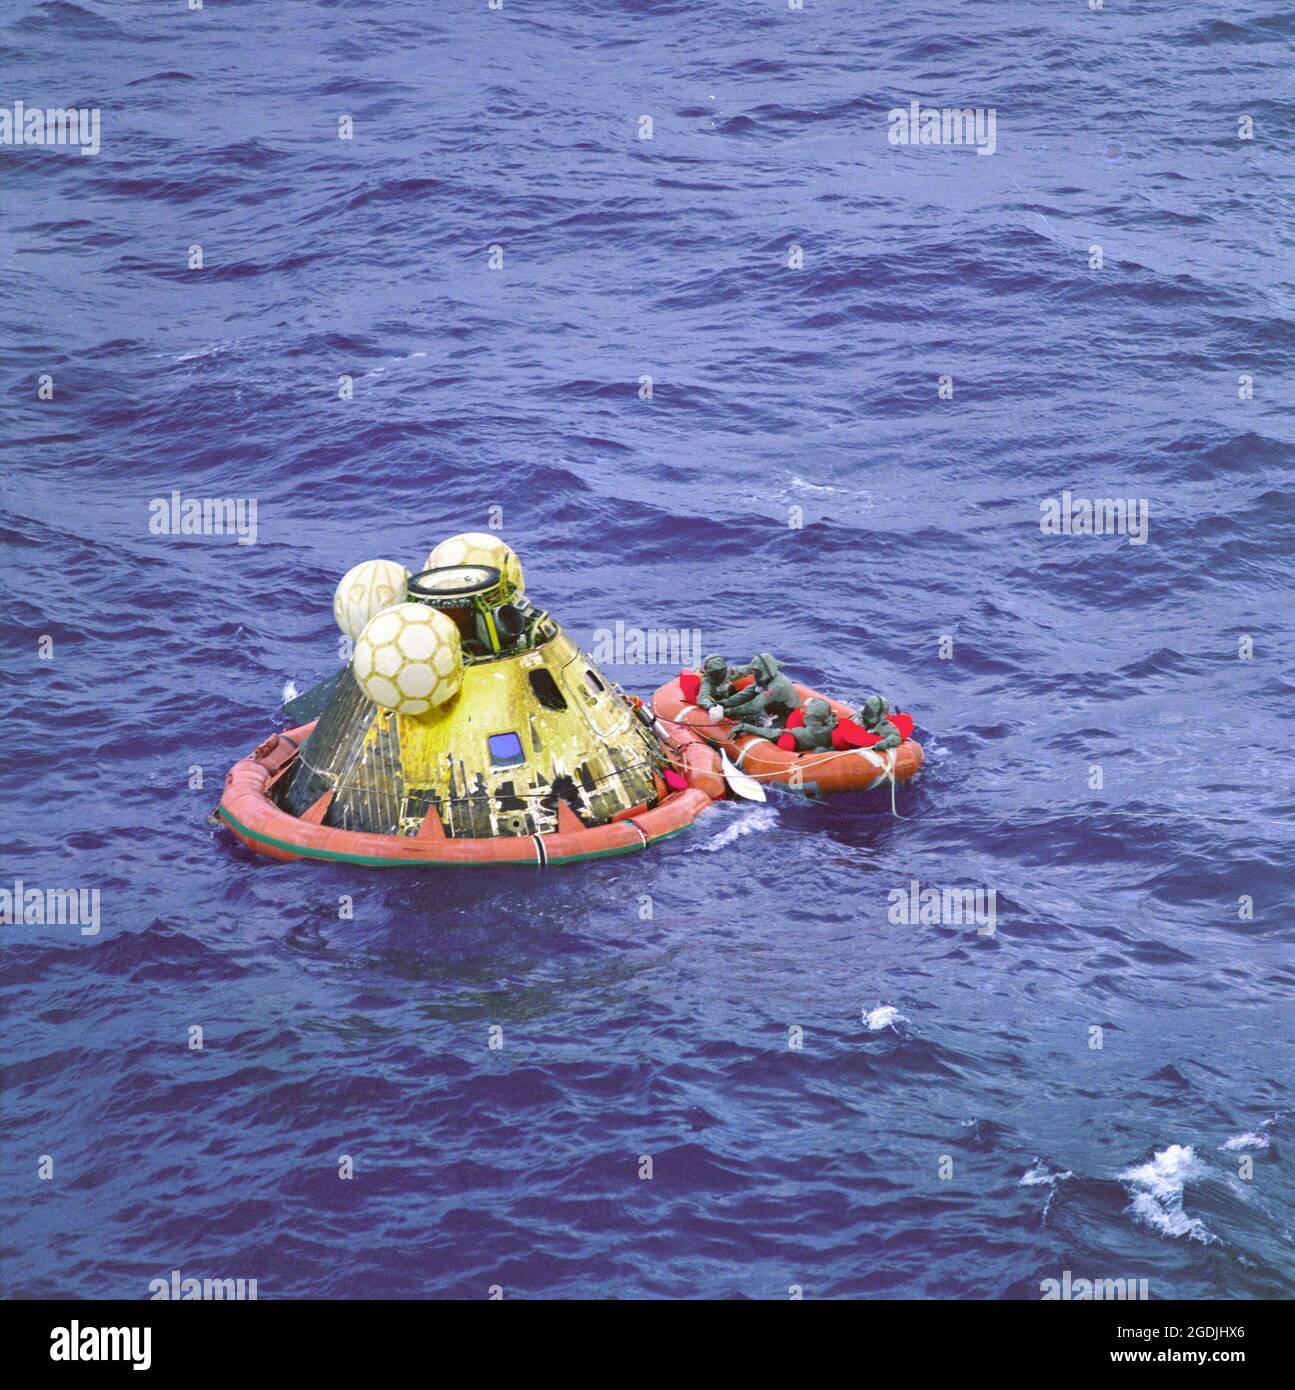 The Apollo 11 crew await pickup by a helicopter after the historic Apollo 11 lunar landing mission. They are in a raft next to the Apollo capsule after splashdown. Stock Photo